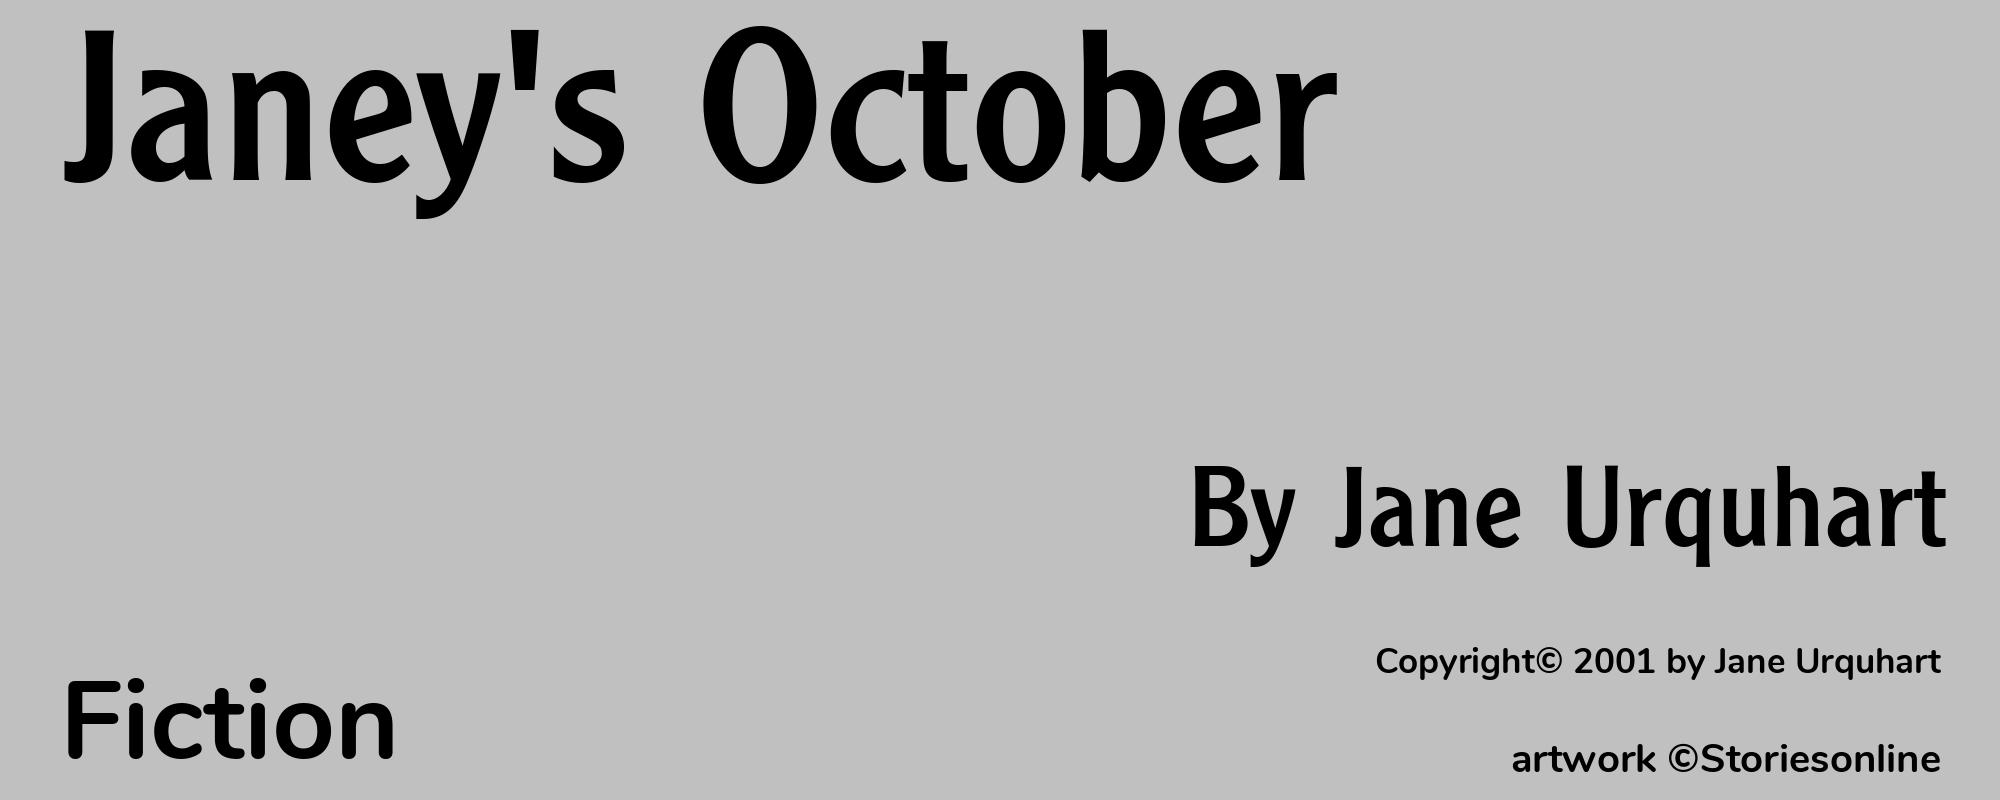 Janey's October - Cover